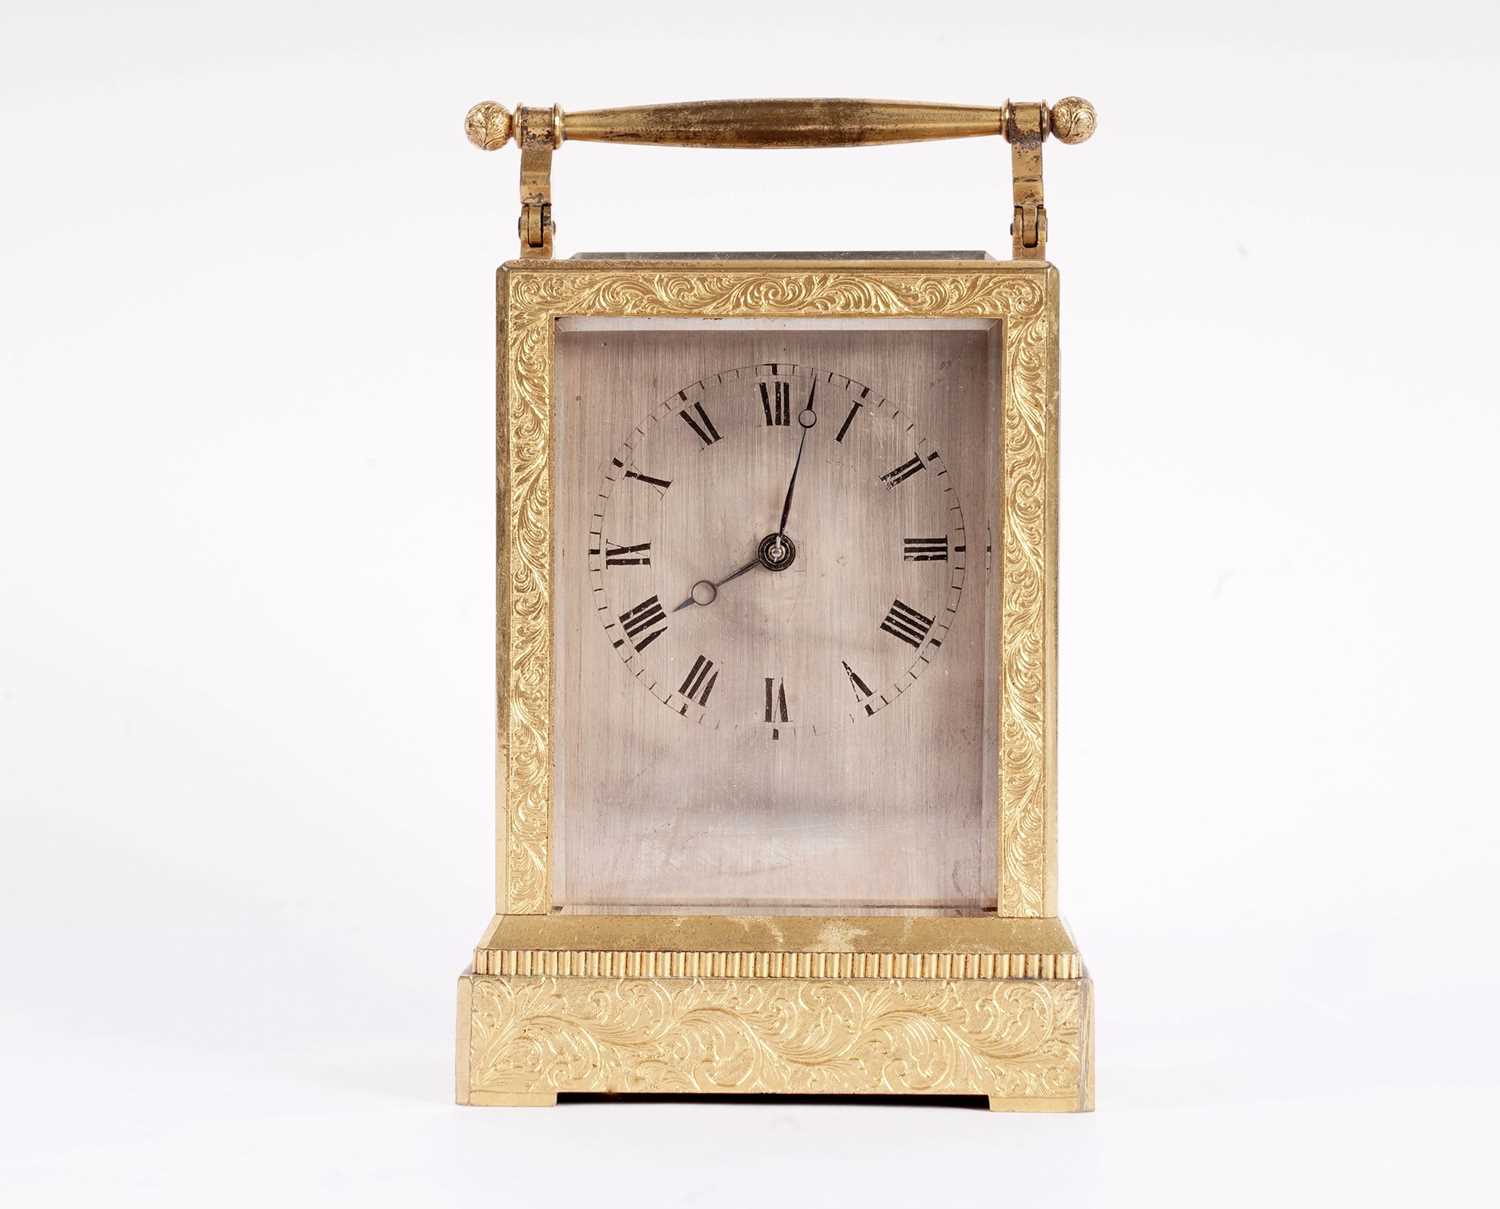 Vieyres of London: A late 19th Century engraved and gilt brass carriage clock - Image 7 of 13